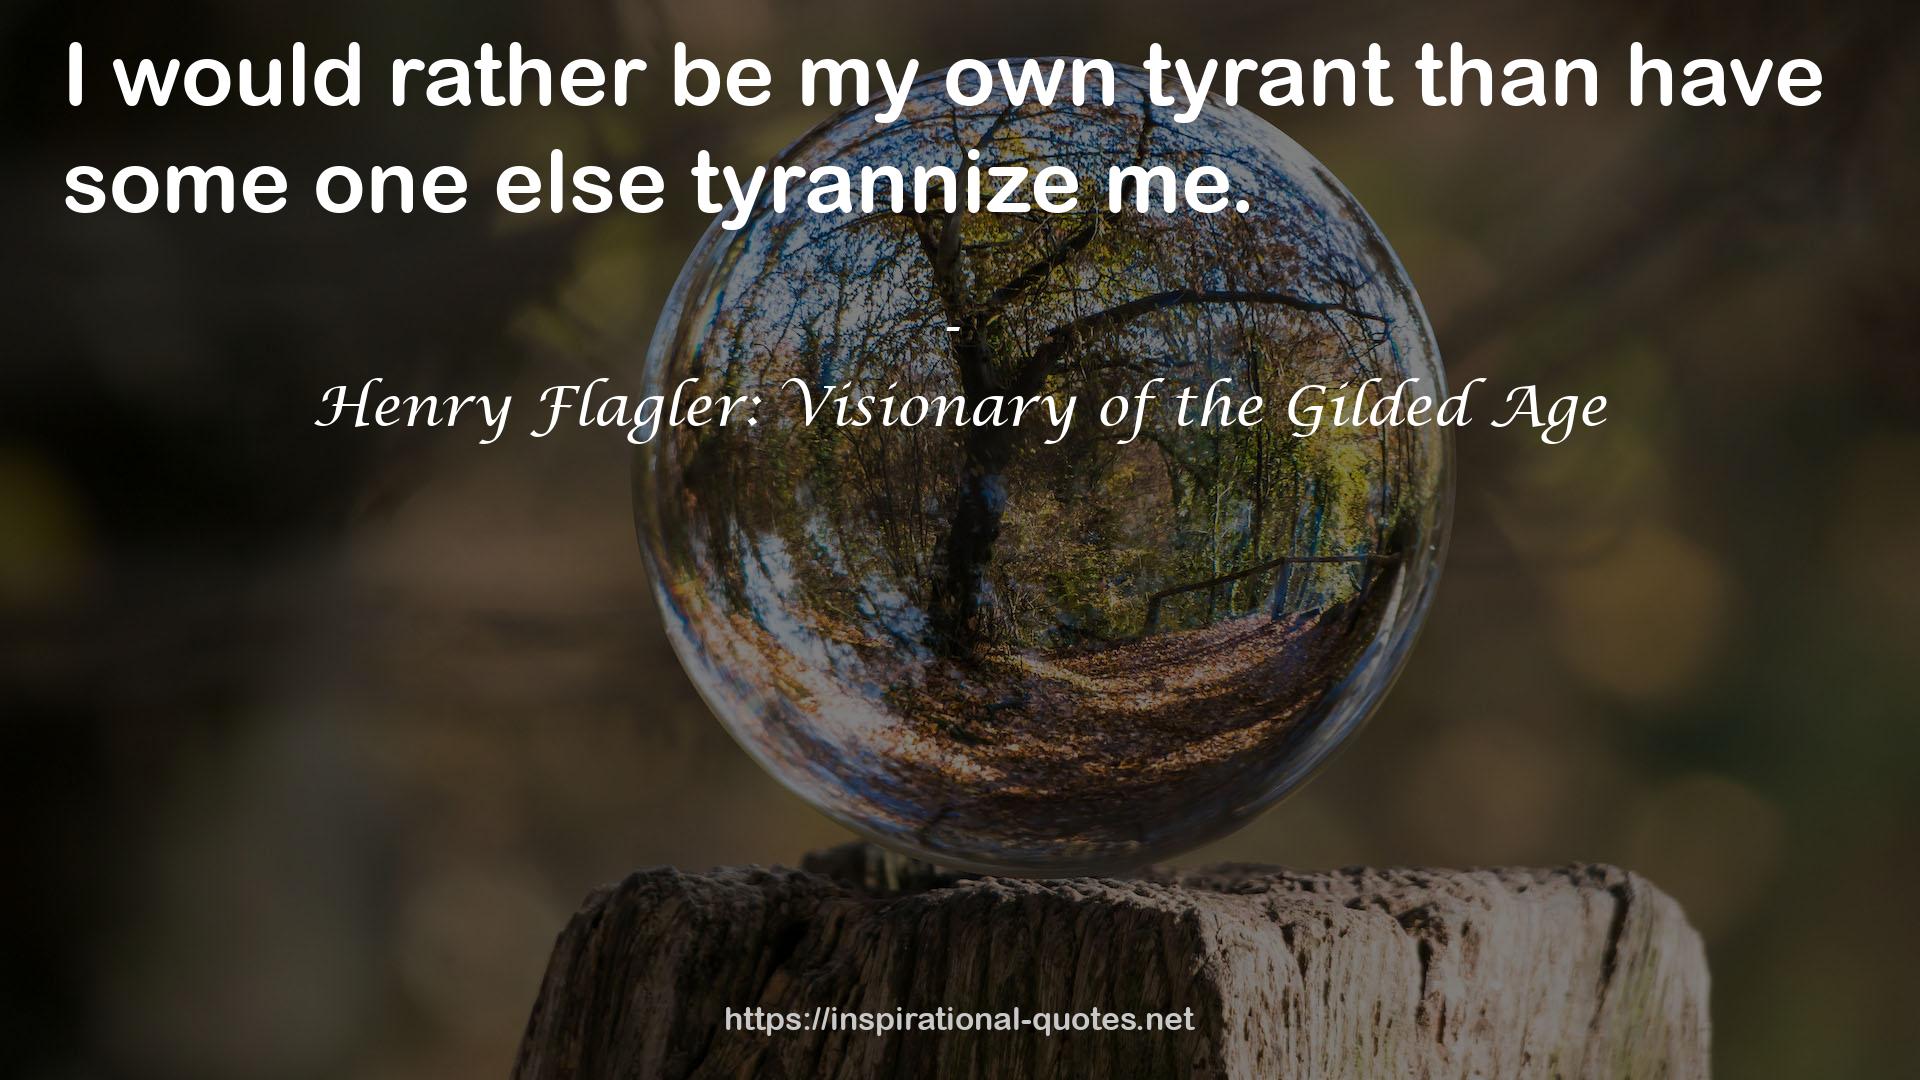 Henry Flagler: Visionary of the Gilded Age QUOTES